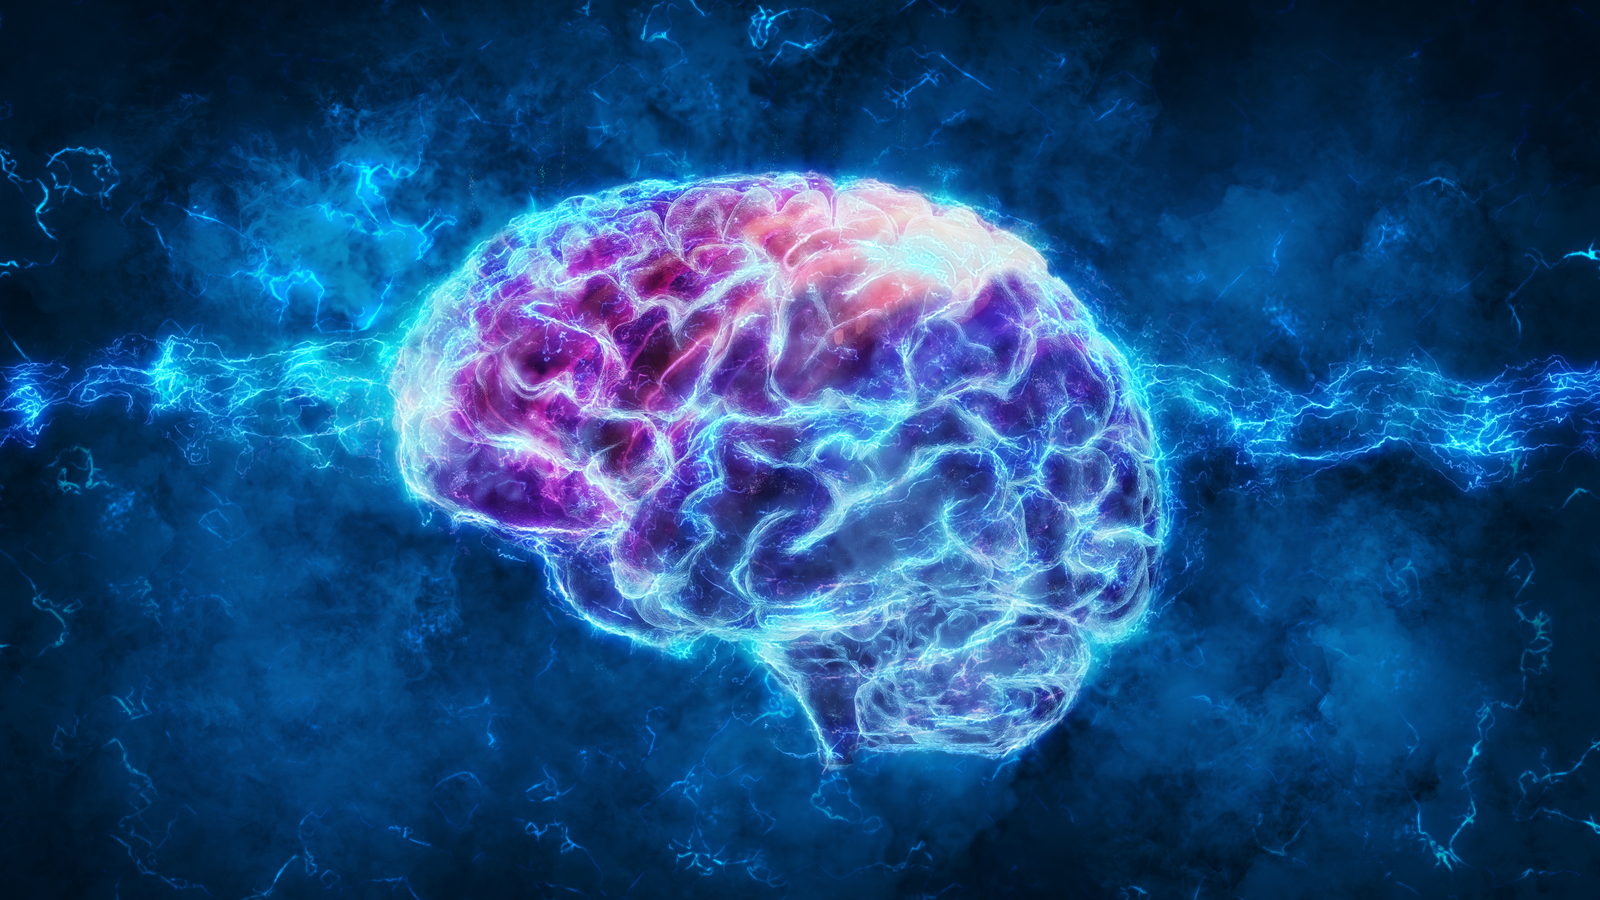 A concept image of a glowing blue brain representing NRBO stock.